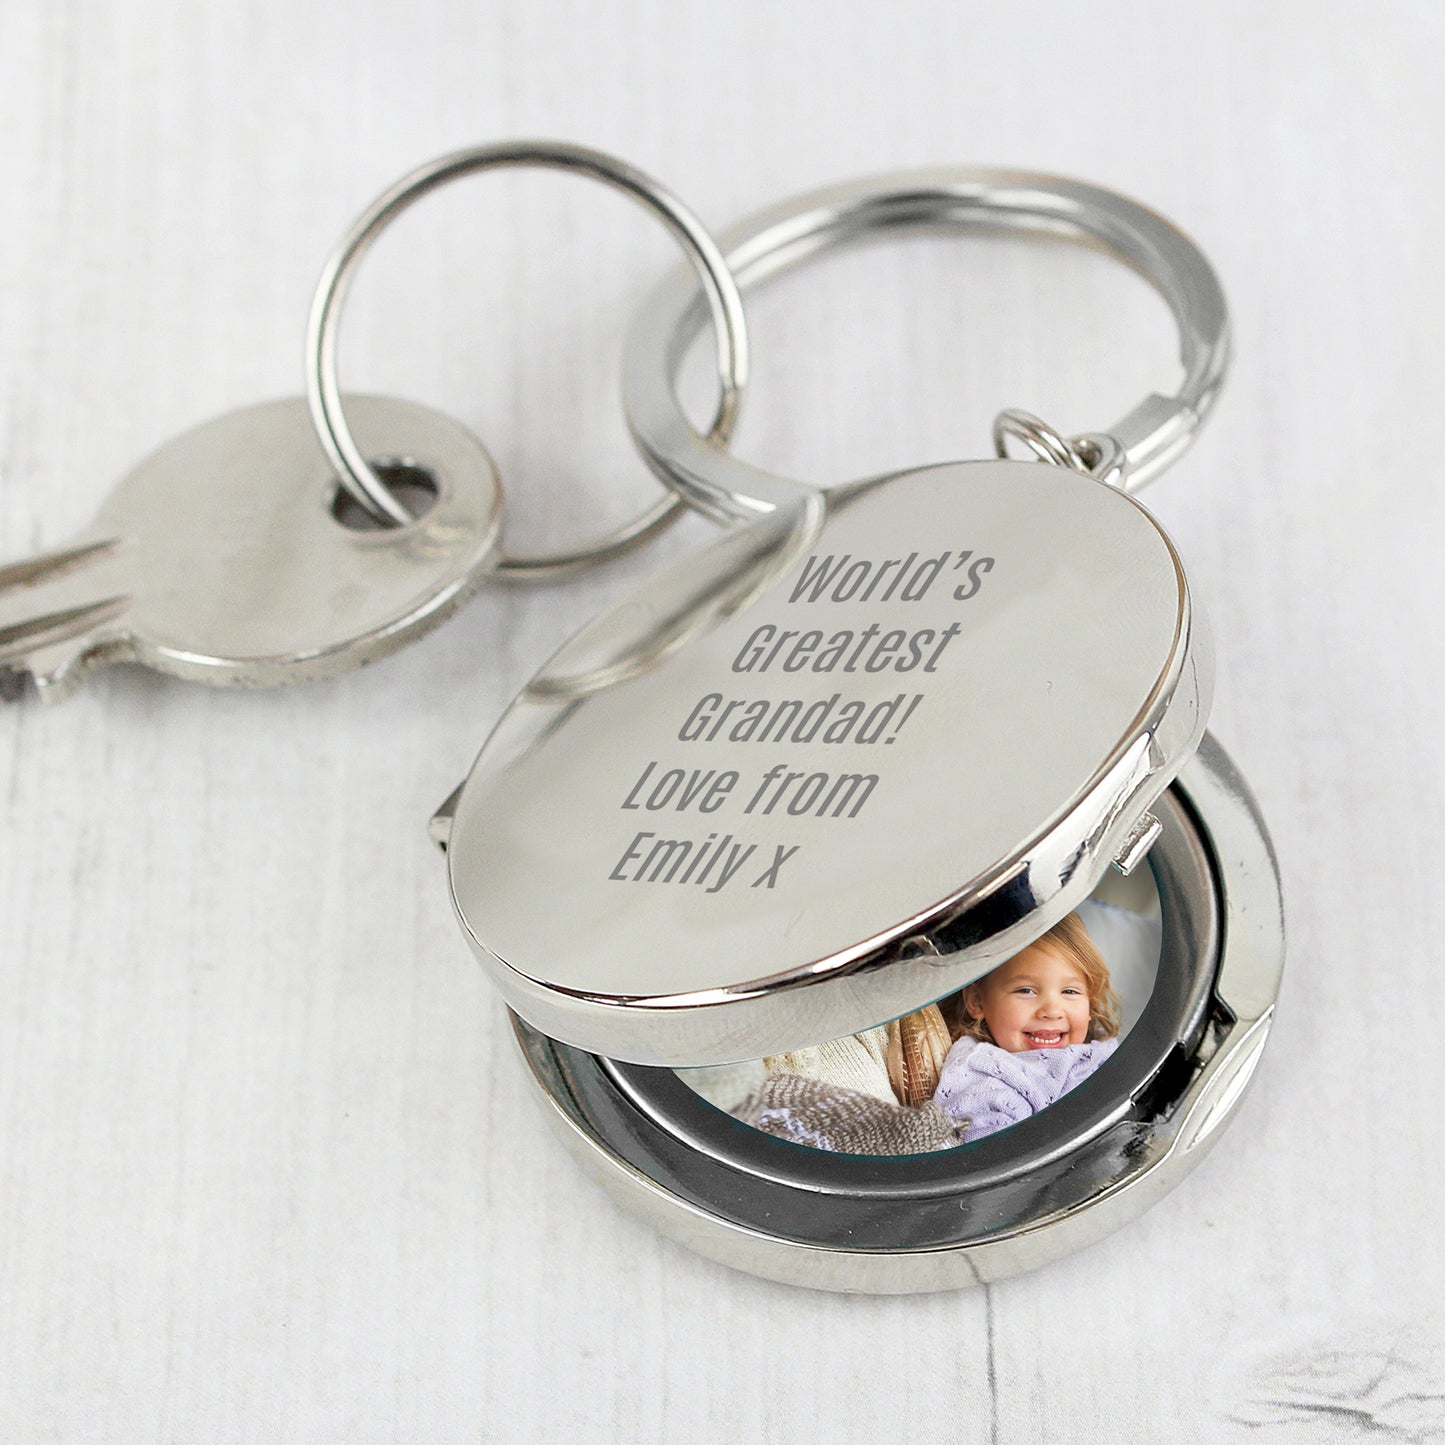 Round photo locket, engraved with your own message - takes two photos. Gift for Grandad